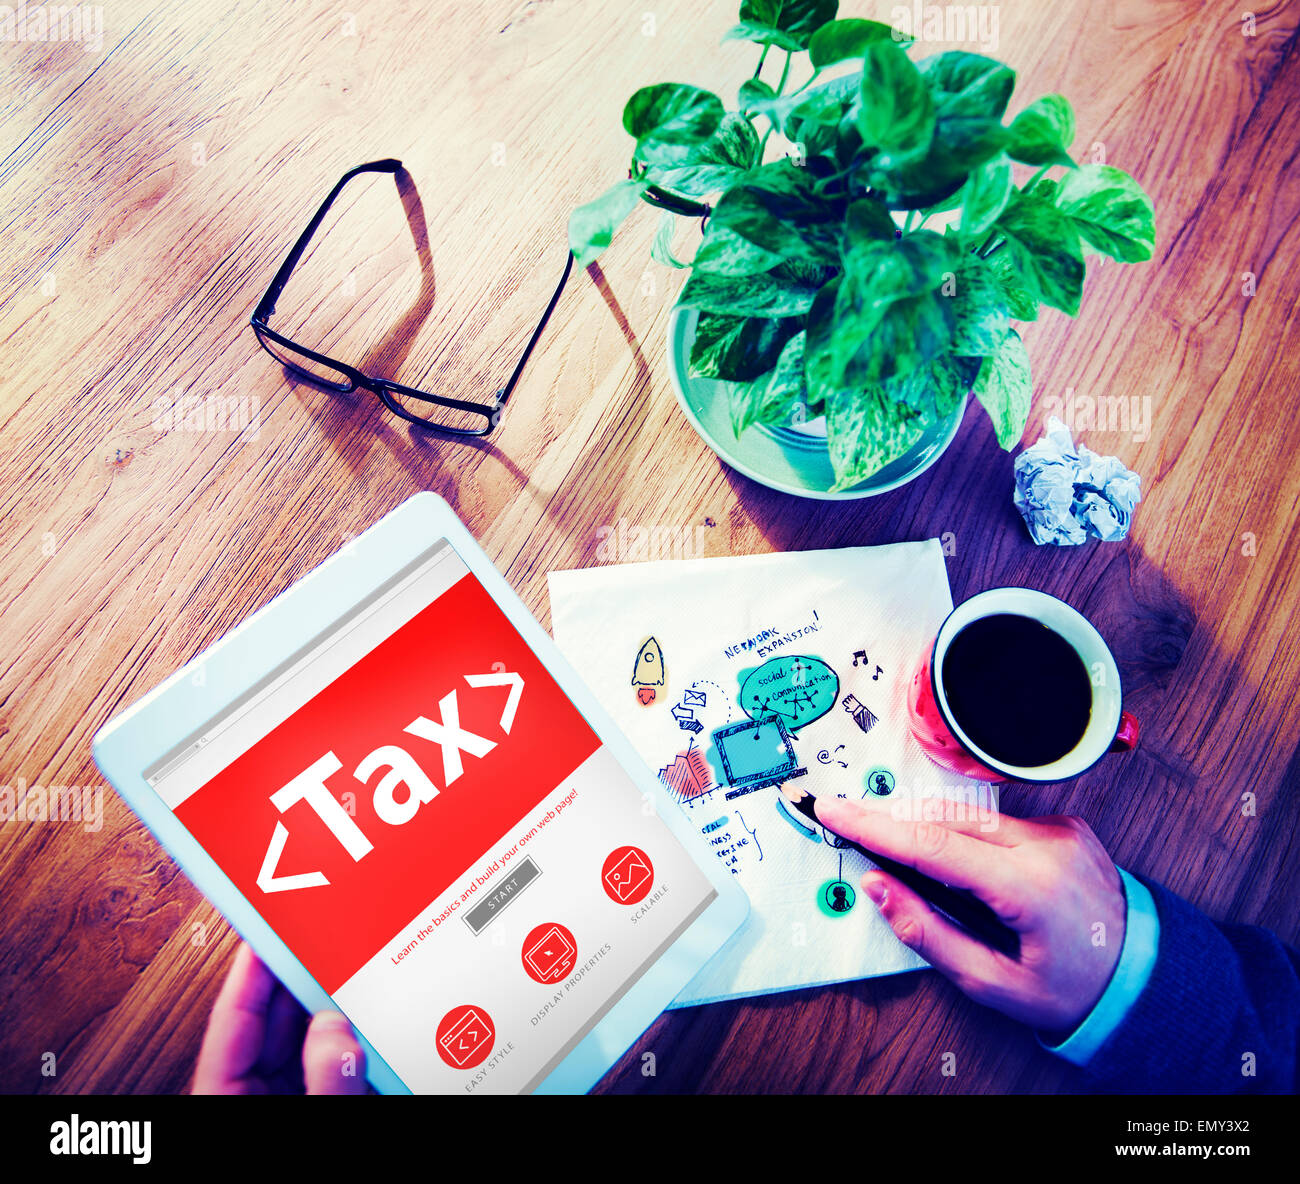 Digital Online Tax Payment Policy Office Concept Stock Photo